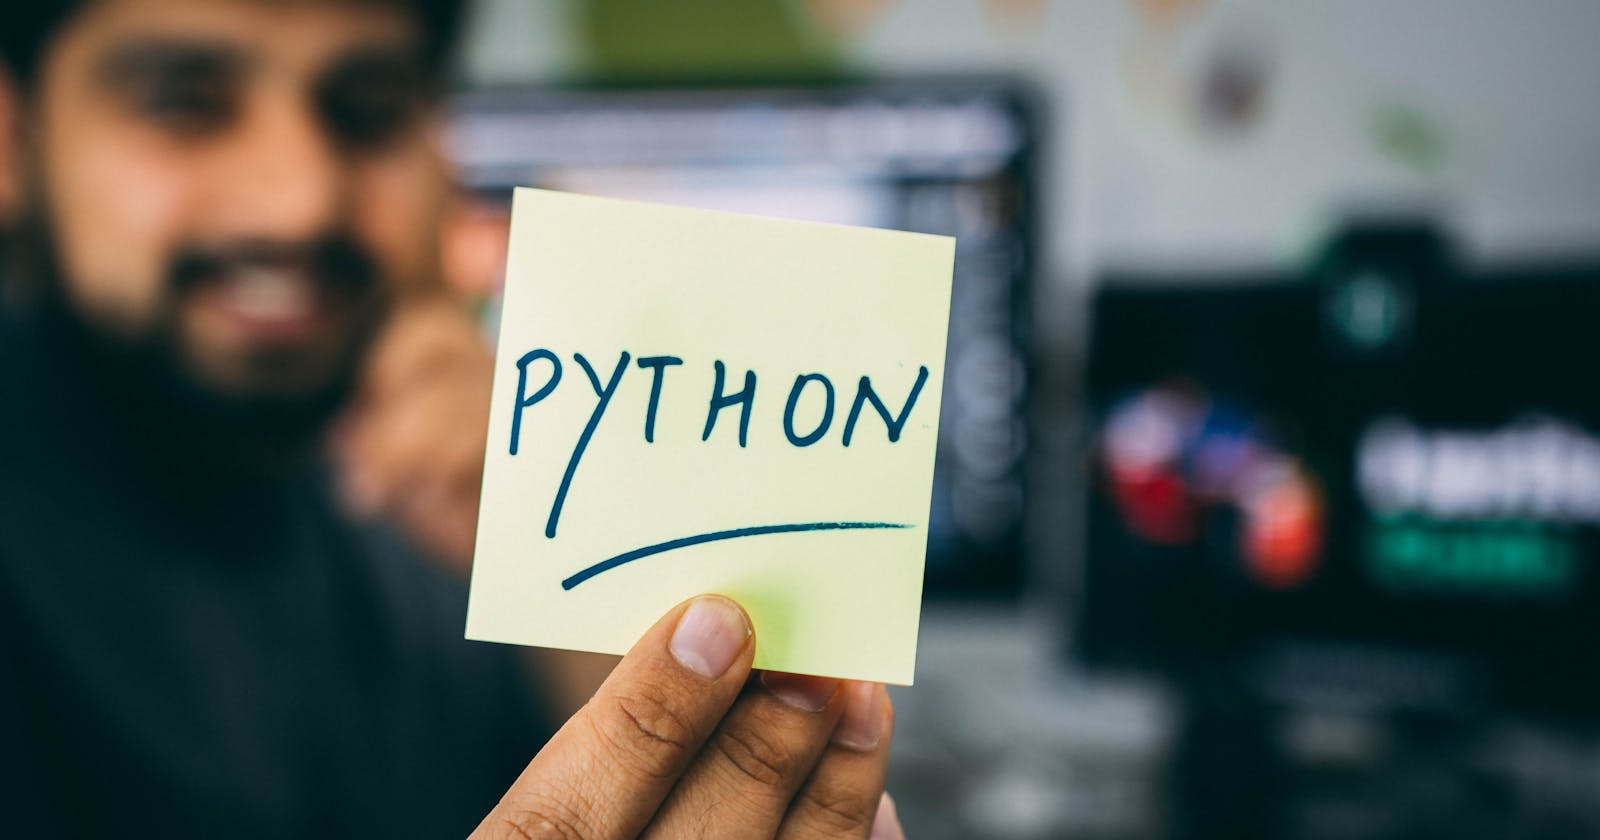 Handling Exceptions In Python